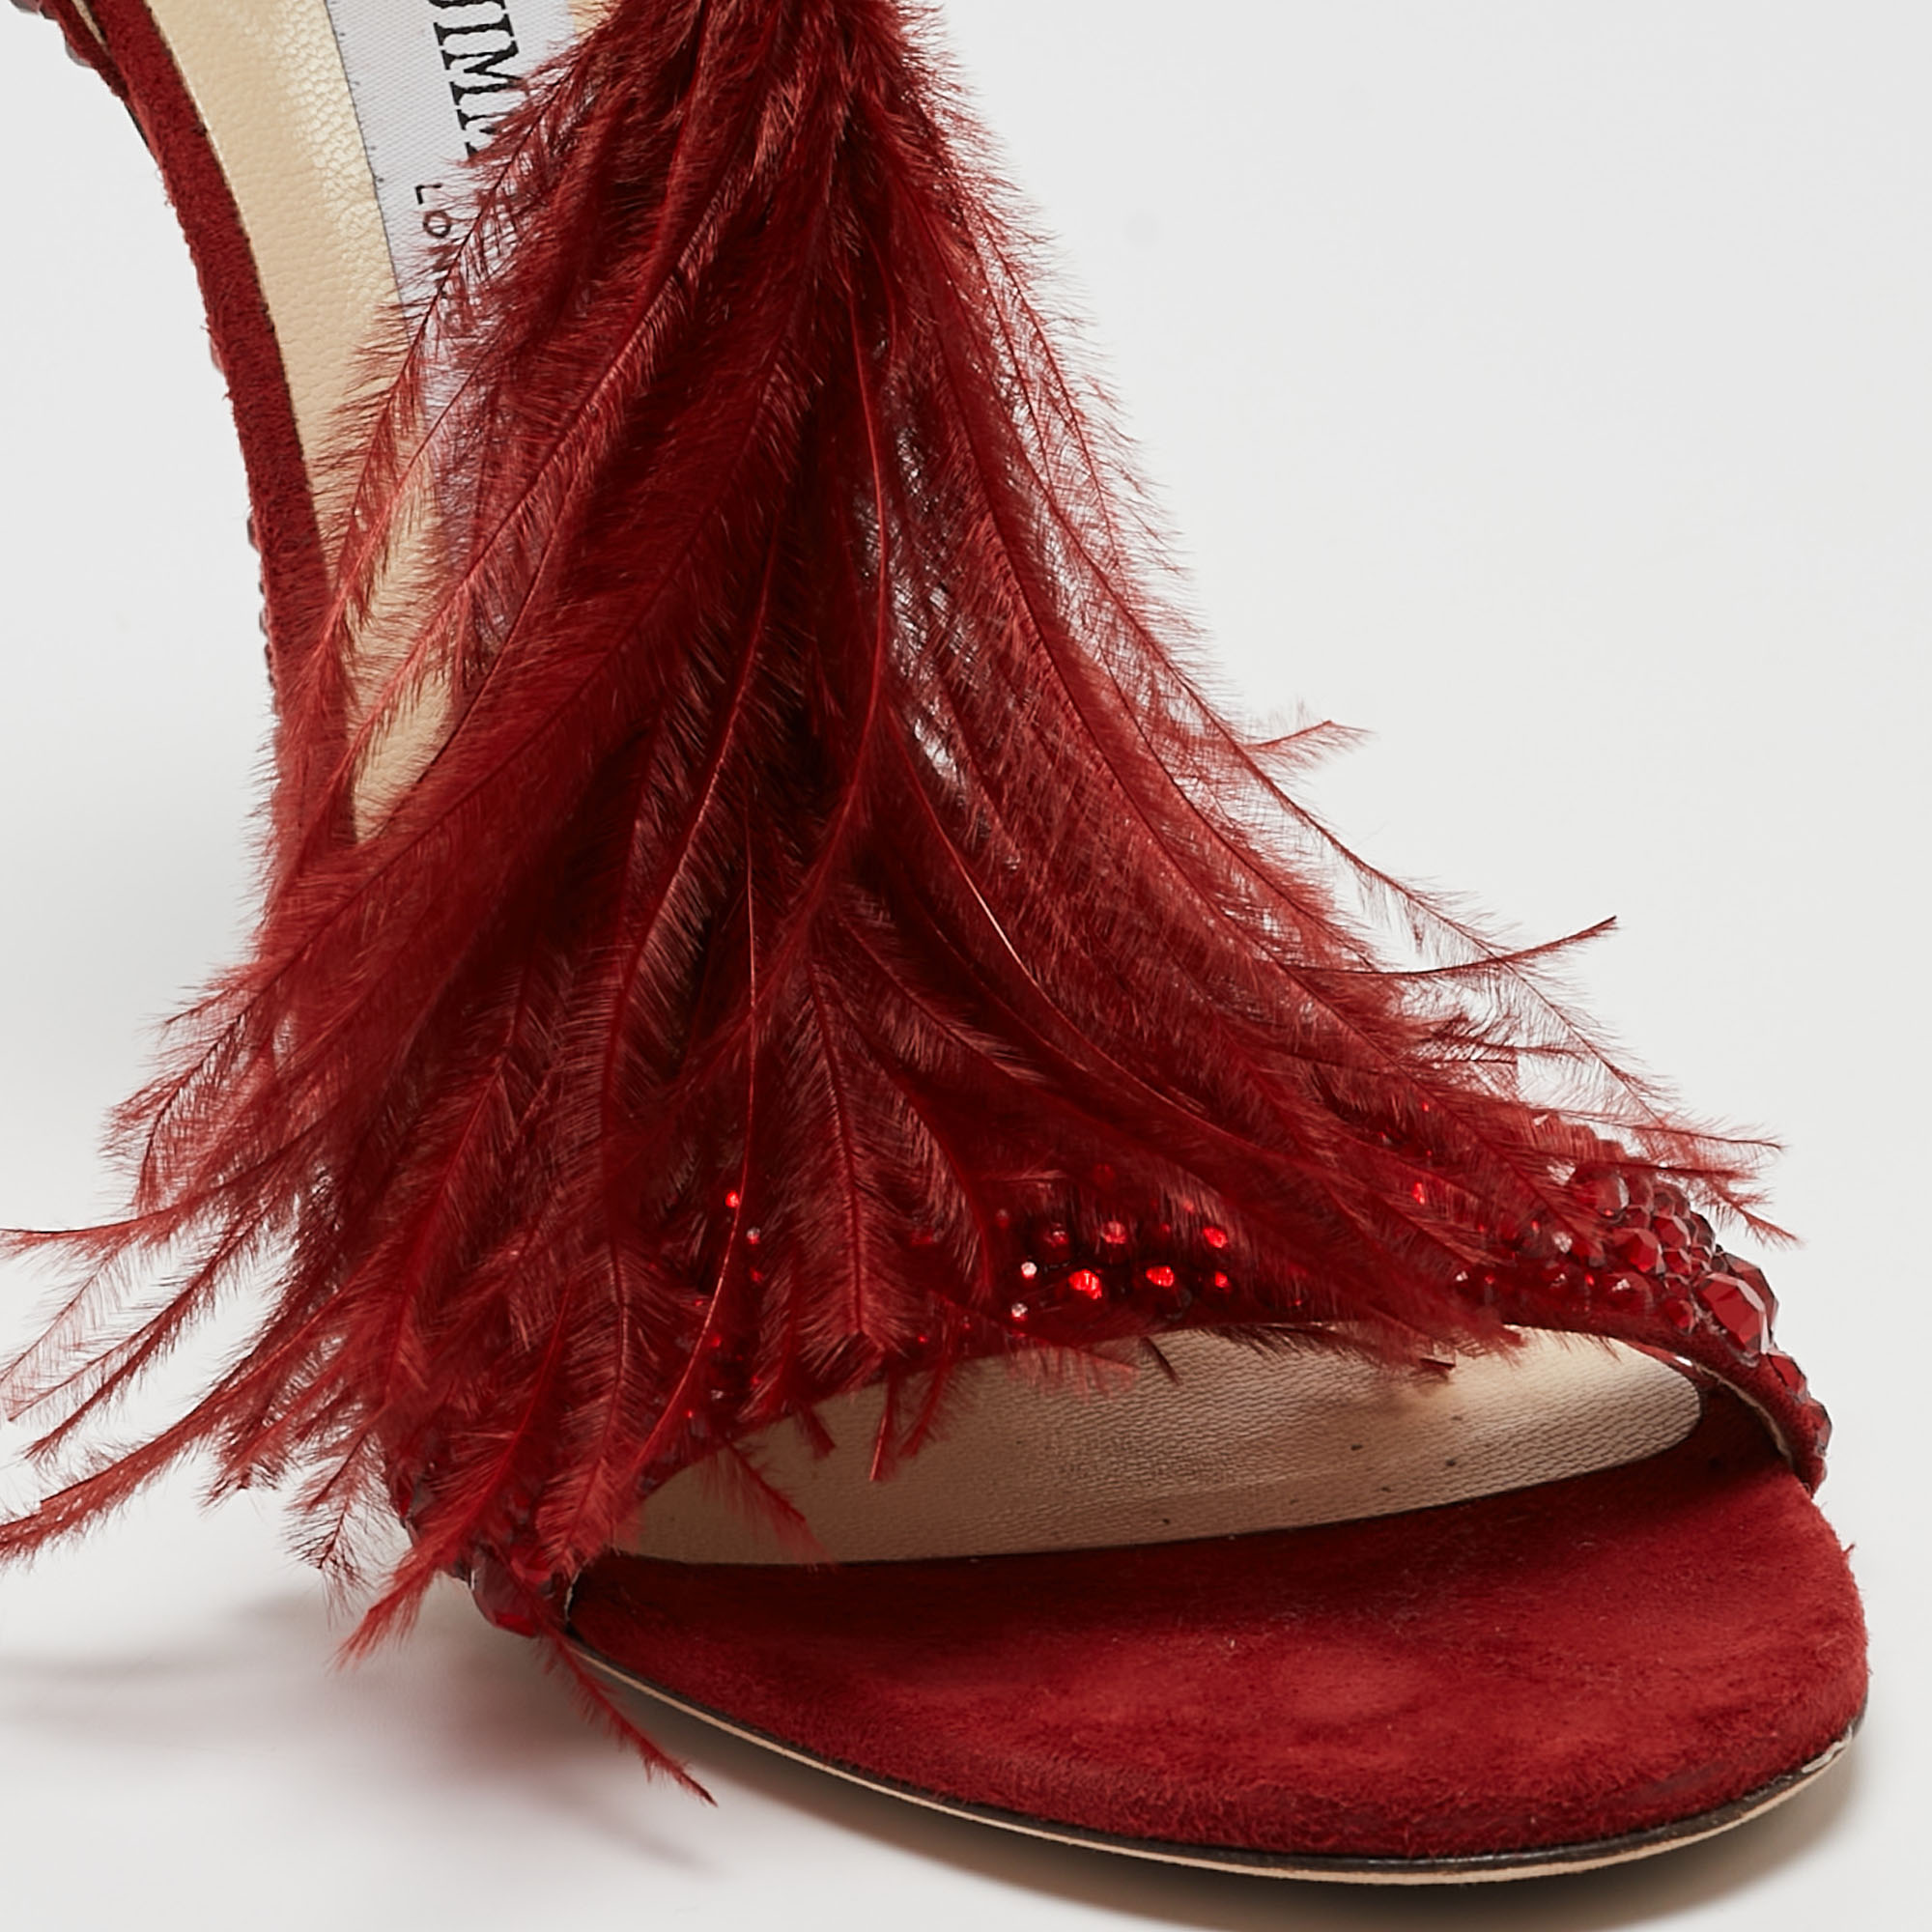 Jimmy Choo Dark Red Crystal Embellished Suede And Ostrich Feather Viola Sandals Size 39